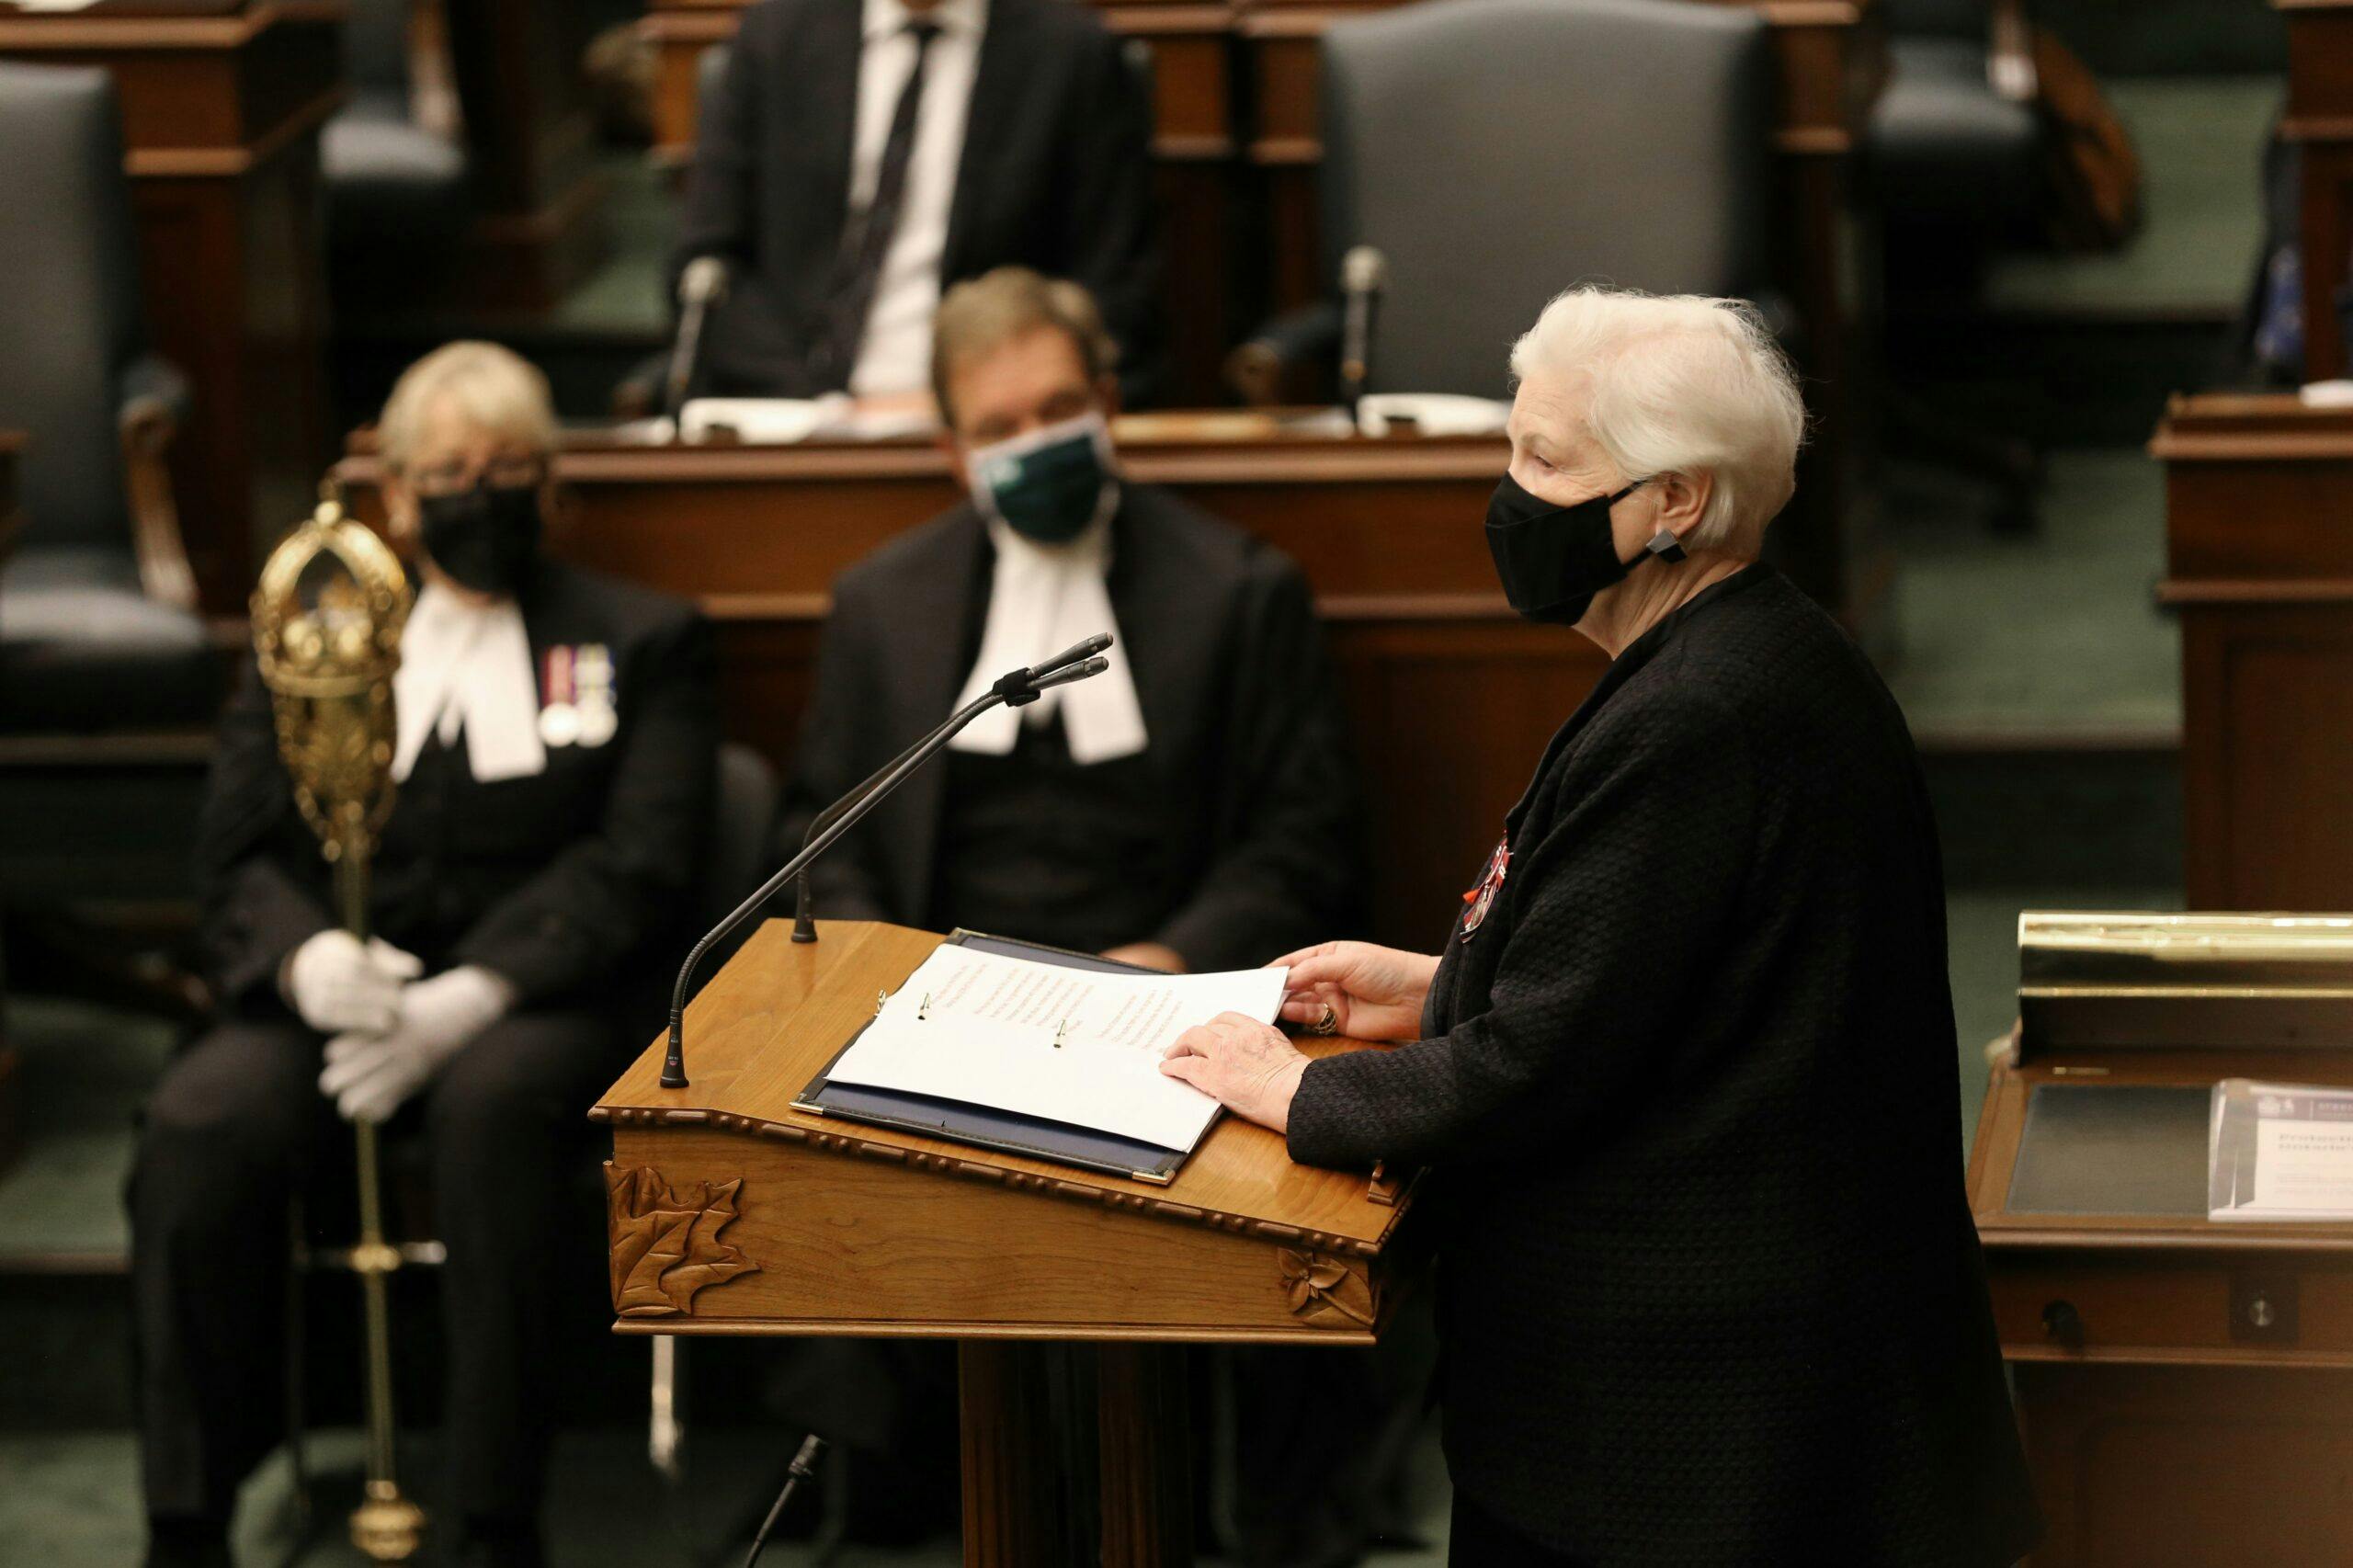 Cash coming to parents, but throne speech hones in on health care and economy